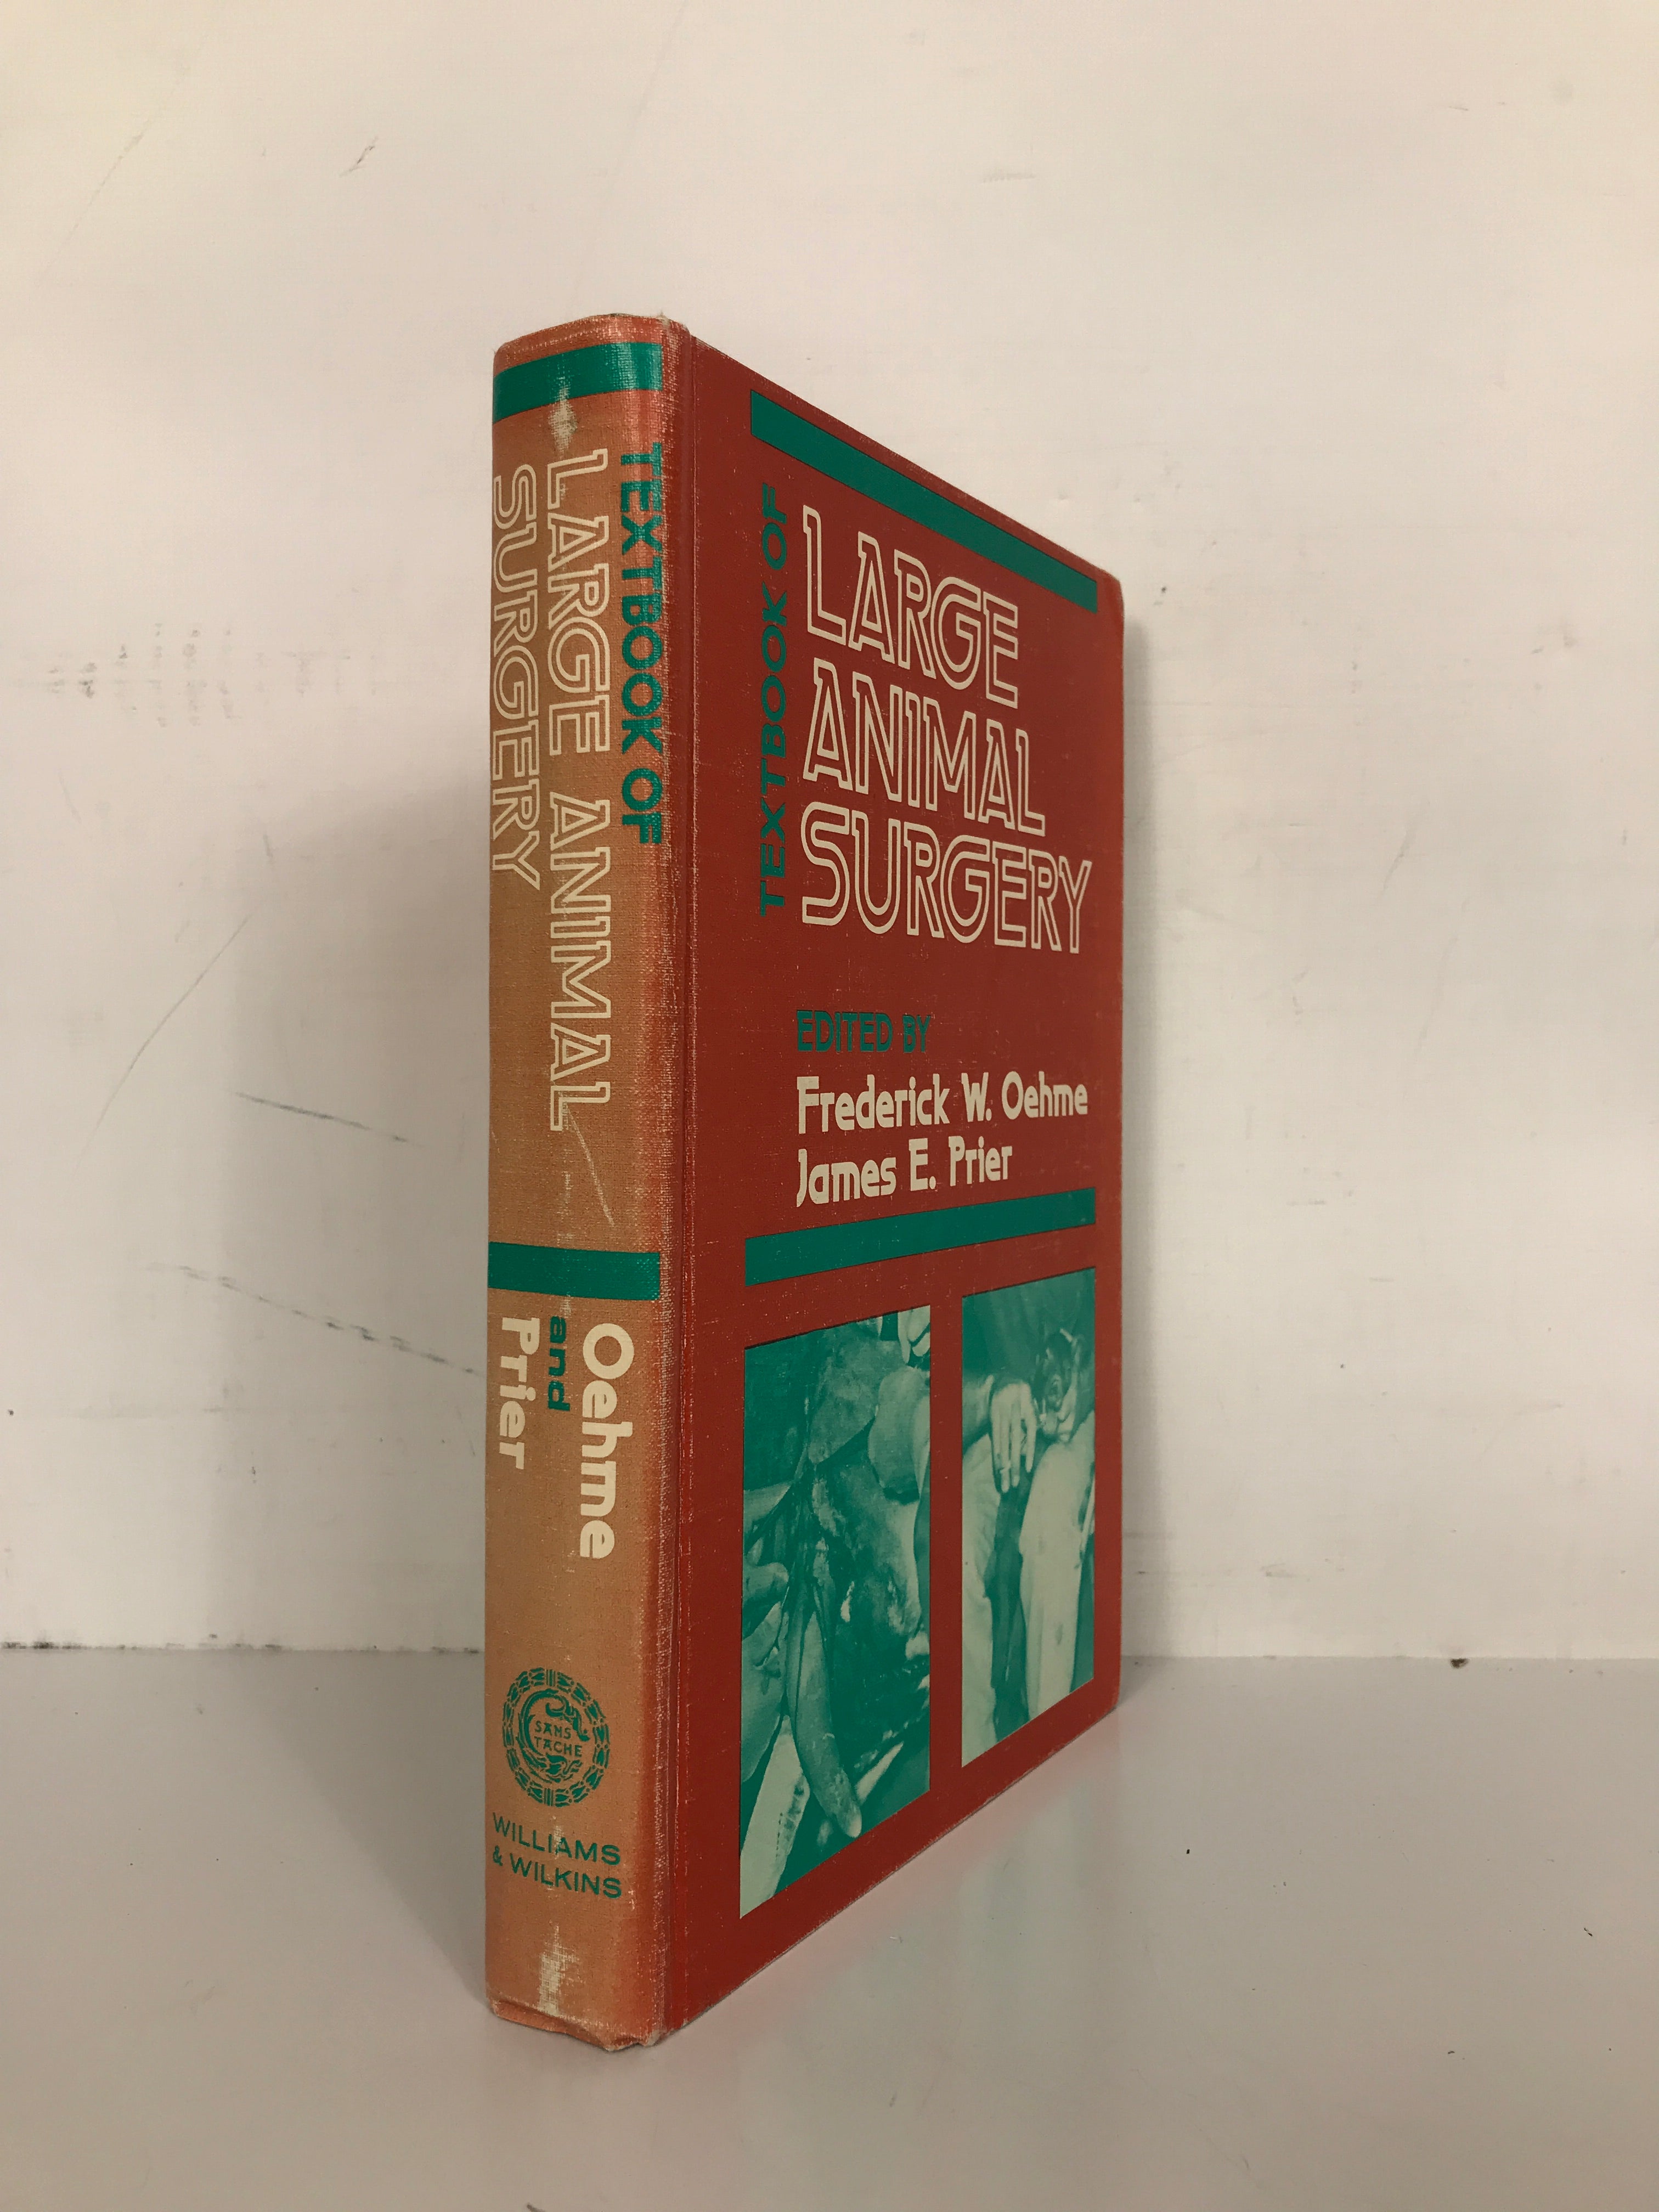 Textbook of Large Animal Surgery by Oehme & Prier First Edition 1976 Reprint HC